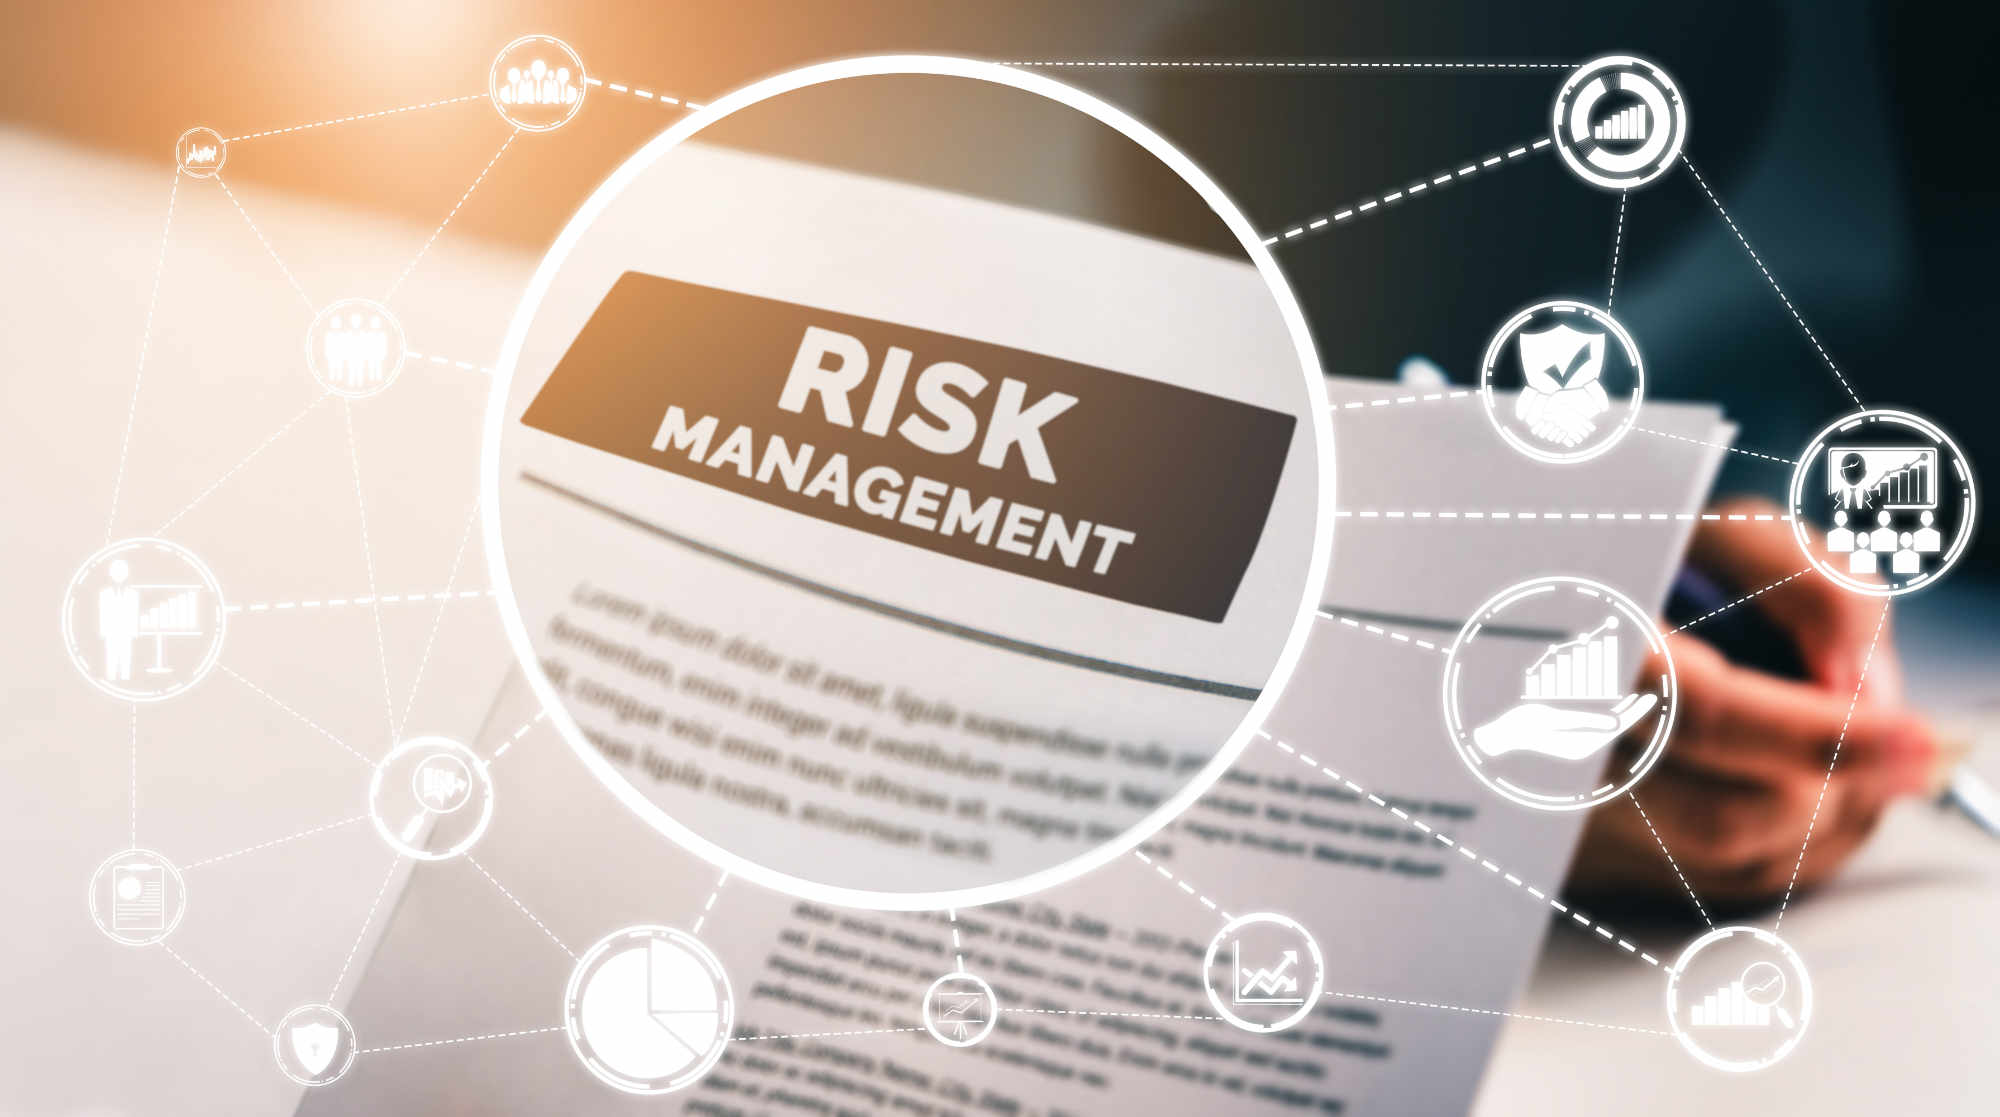 A Look at Threat and Vulnerability Sources in Risk Management